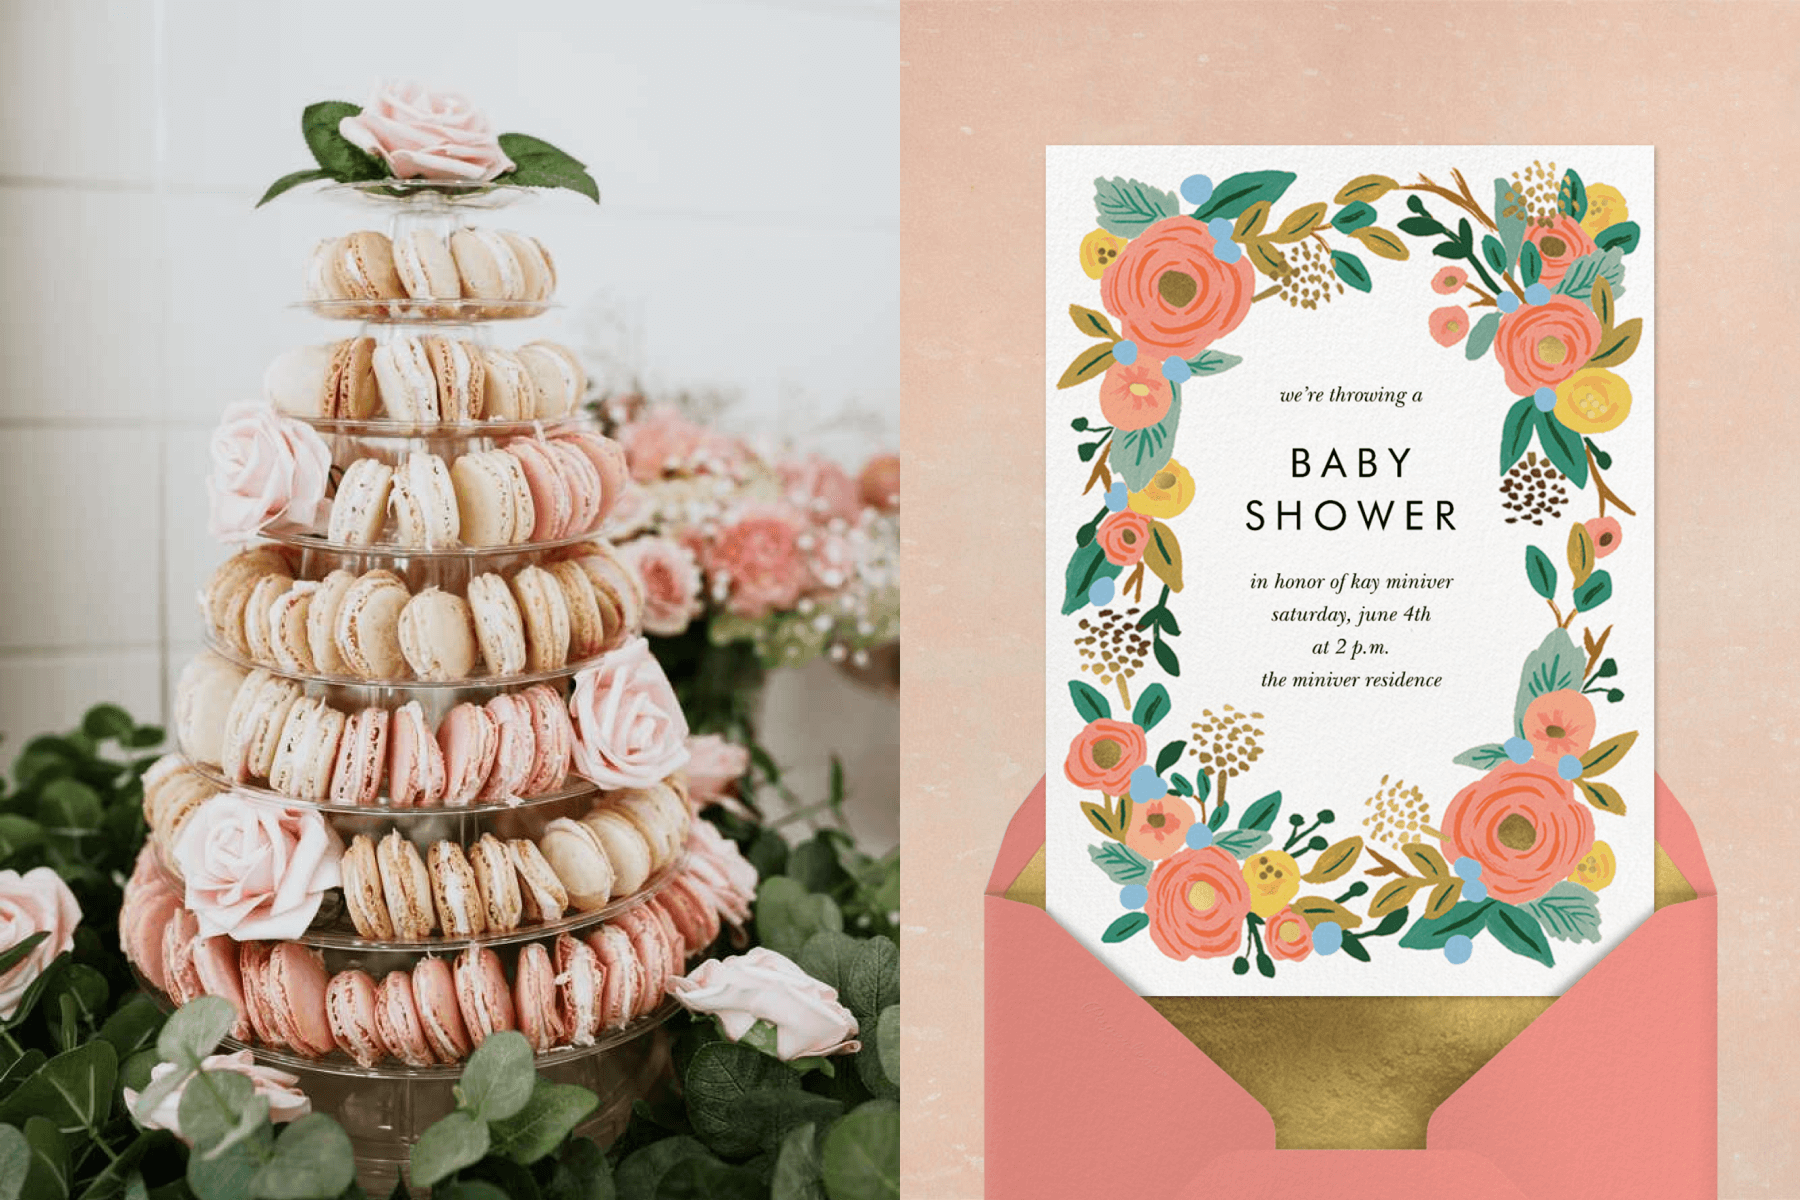 Left: A macaron tower. Right: An invitation with a painterly floral border